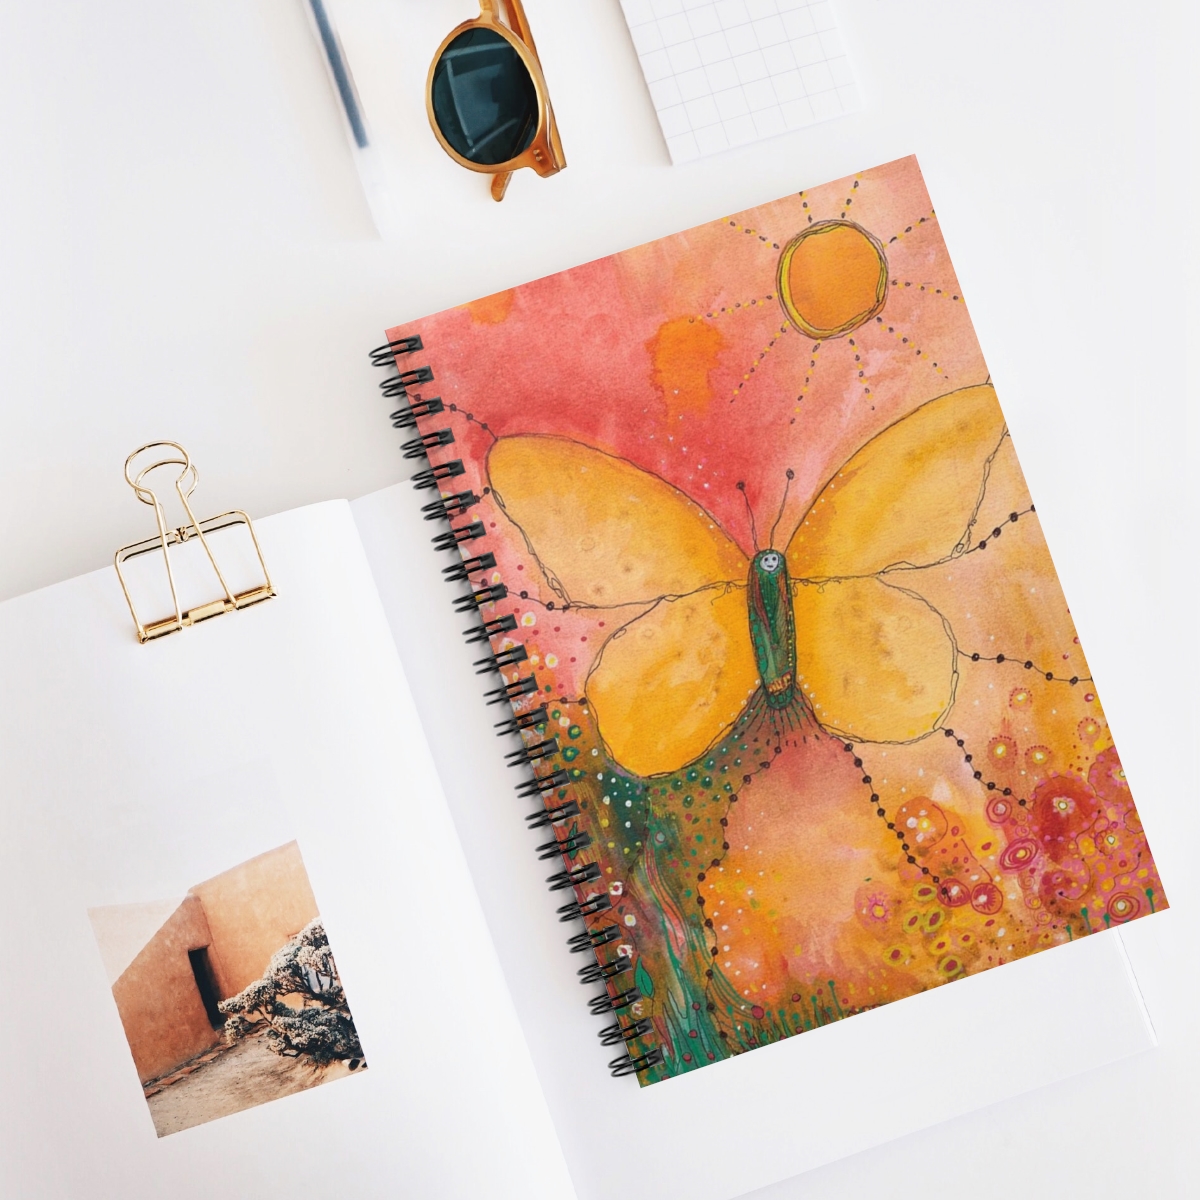 Butter fly journal in context. Image of butterfly uses soft tones of yellows and oranges and the butterfly is rising to greet the sun